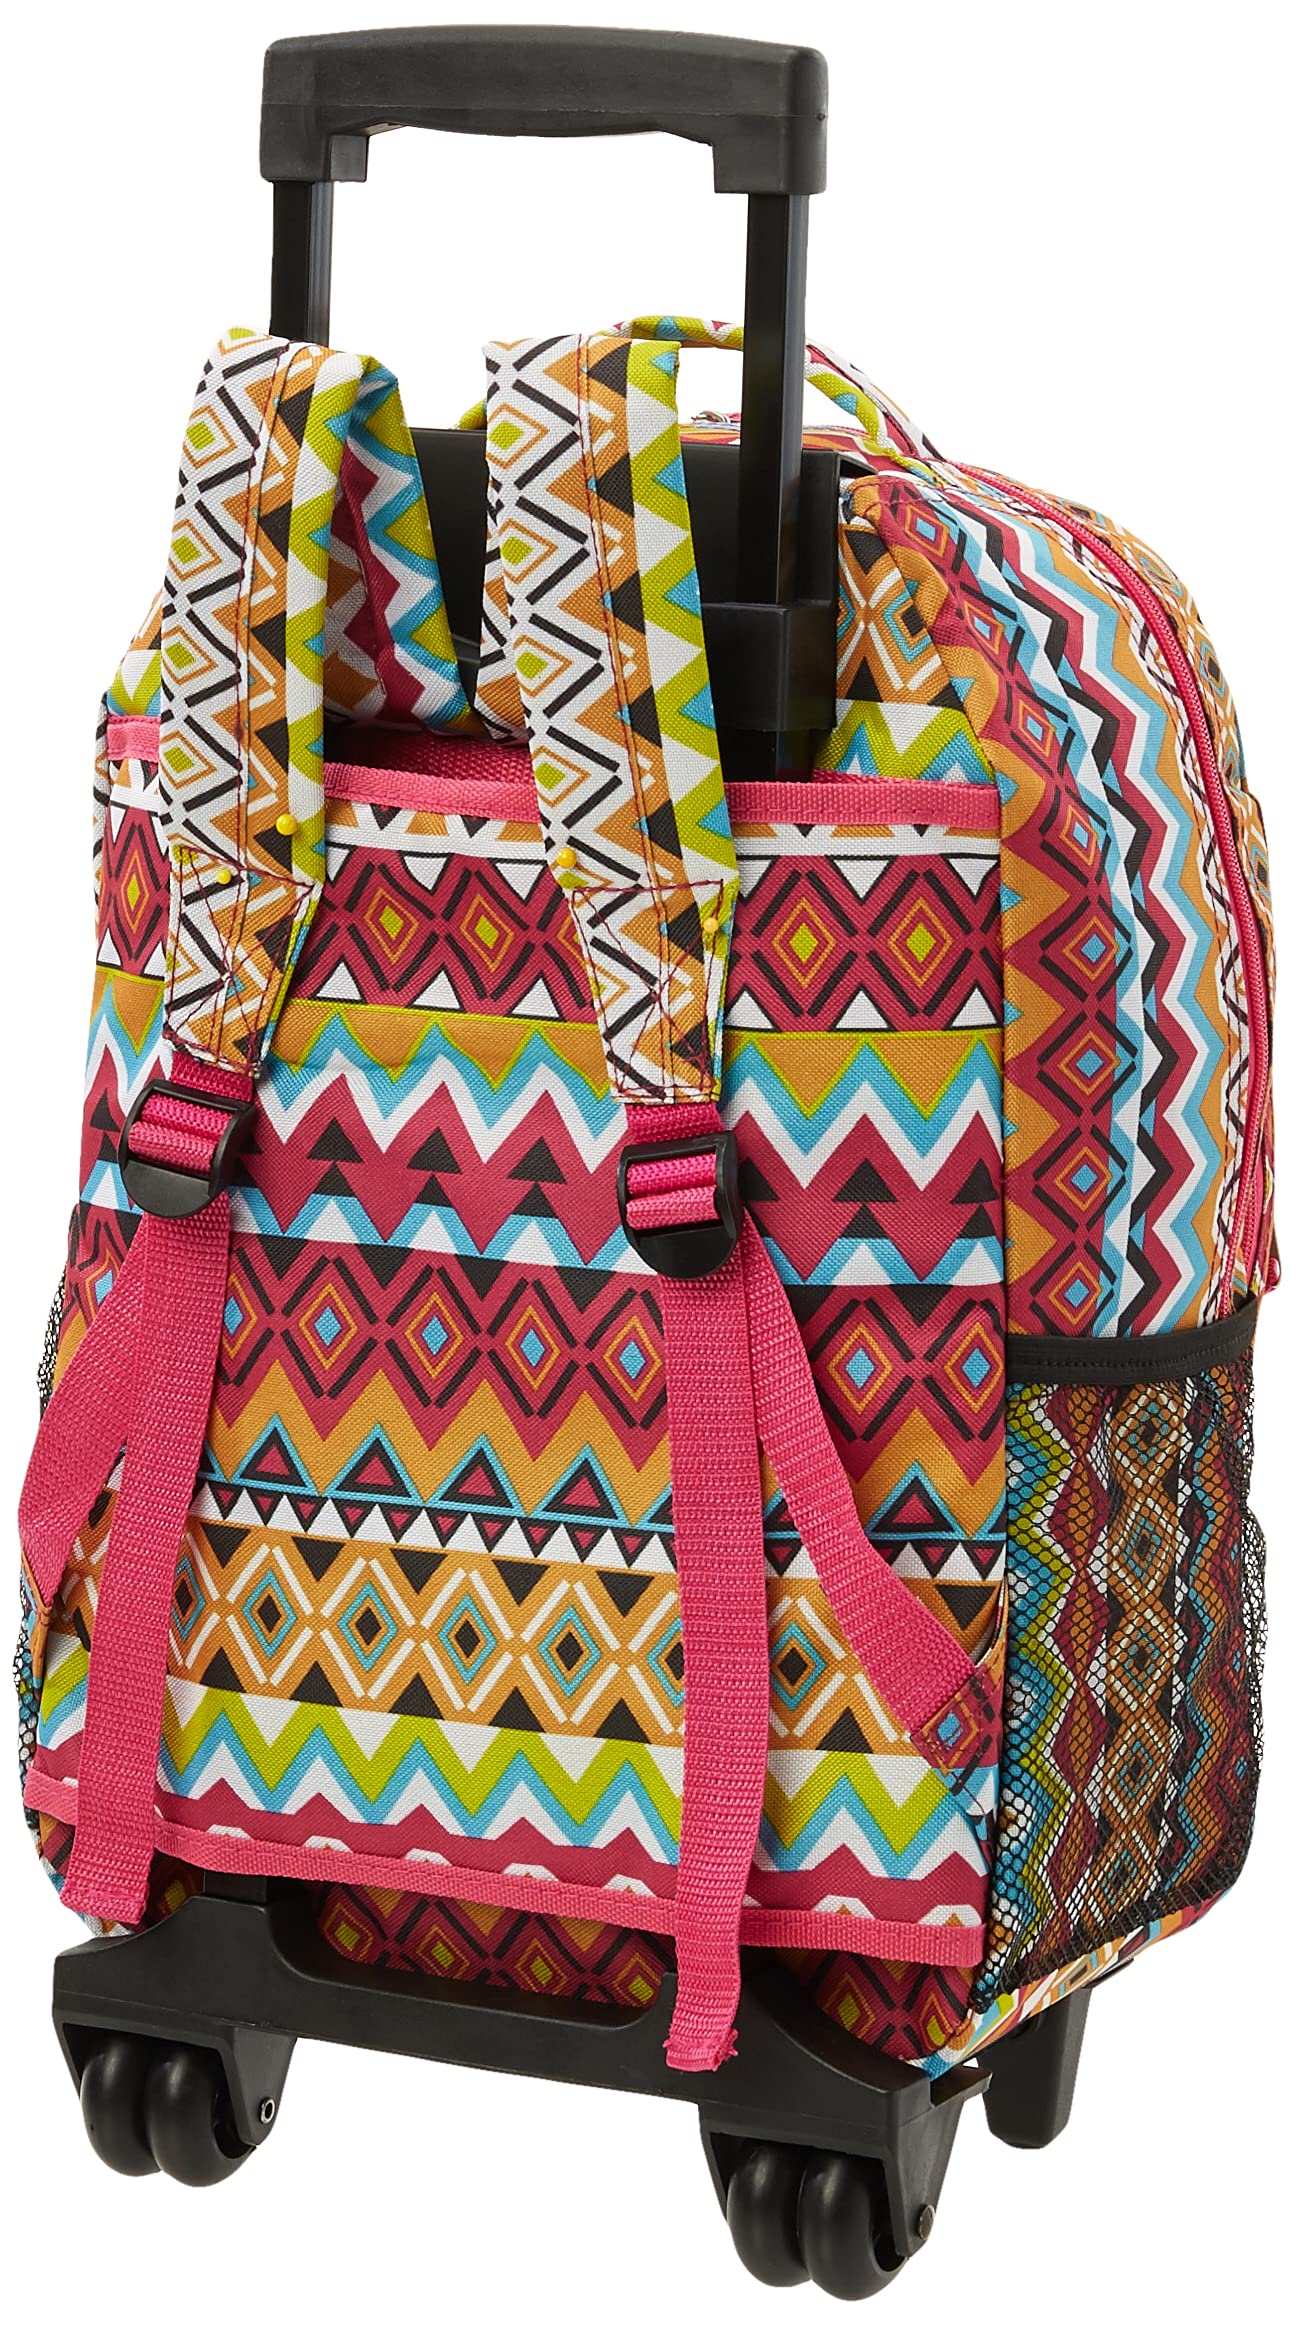 Rockland Double Handle Rolling Backpack, Tribal, 17-Inch